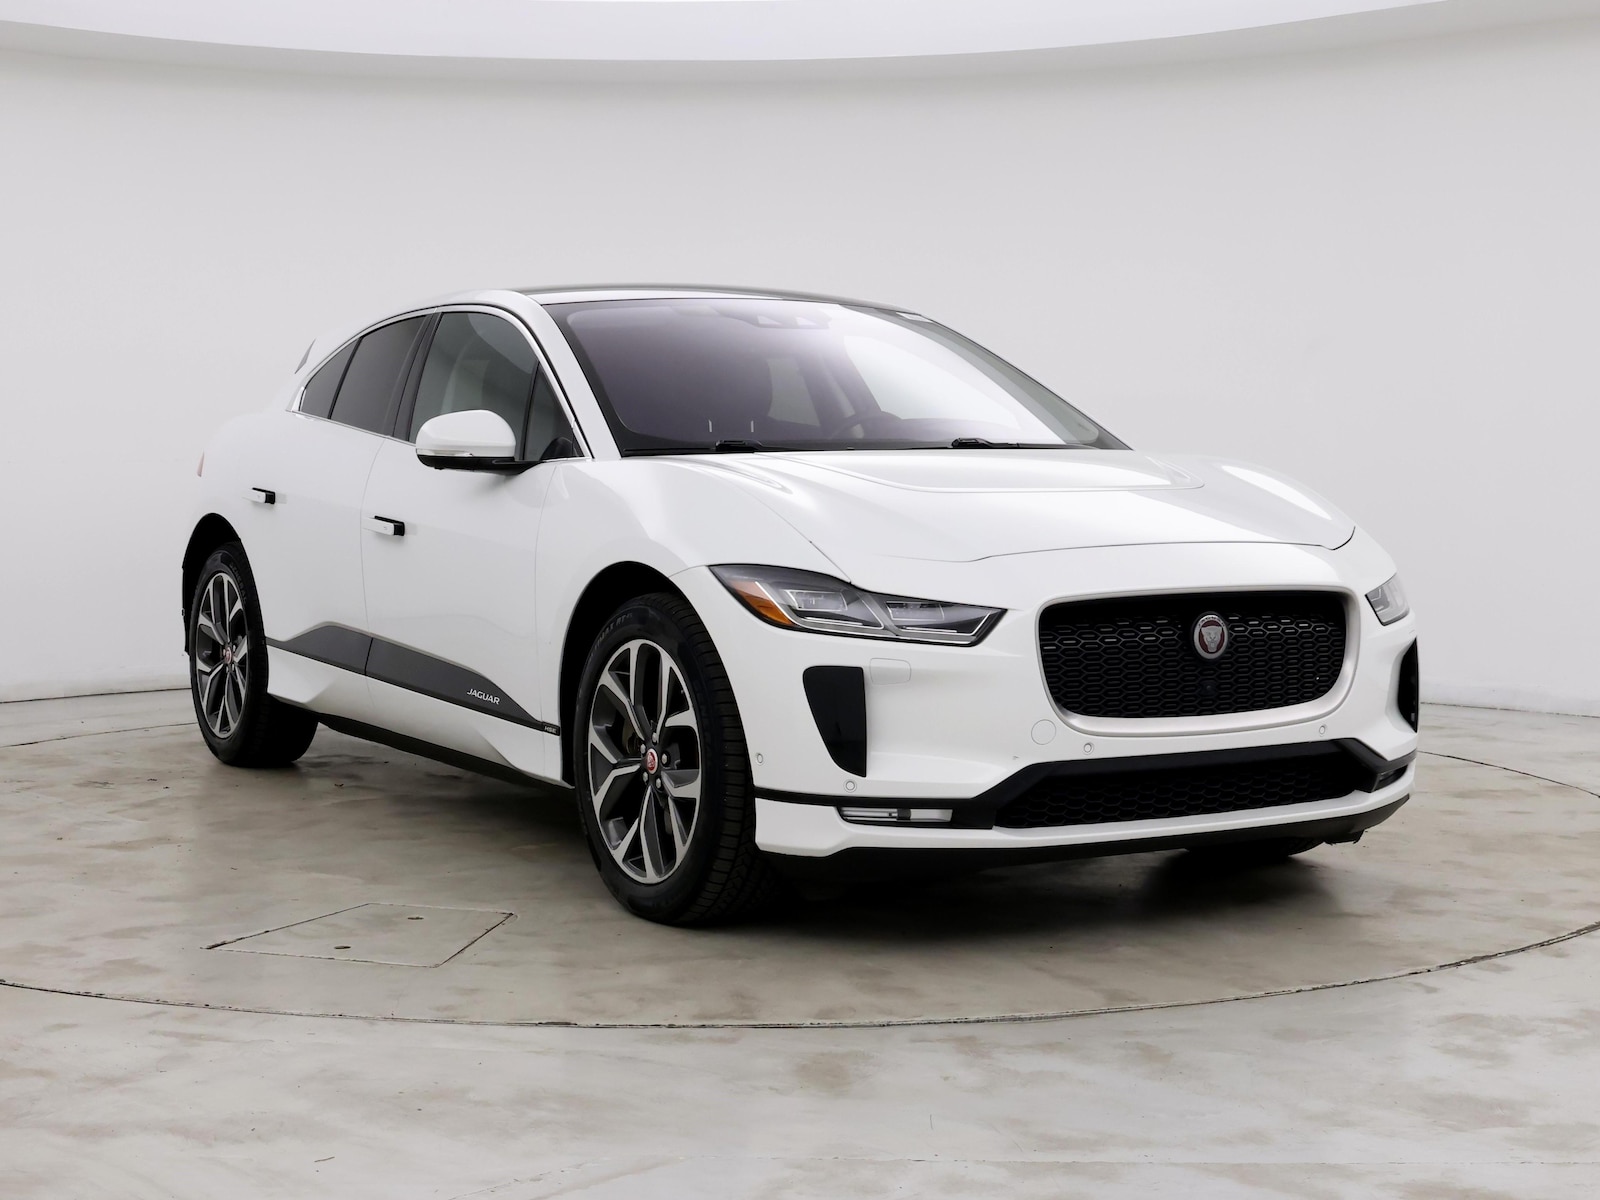 Used 2019 Jaguar I-PACE HSE with VIN SADHD2S15K1F74283 for sale in Kenosha, WI